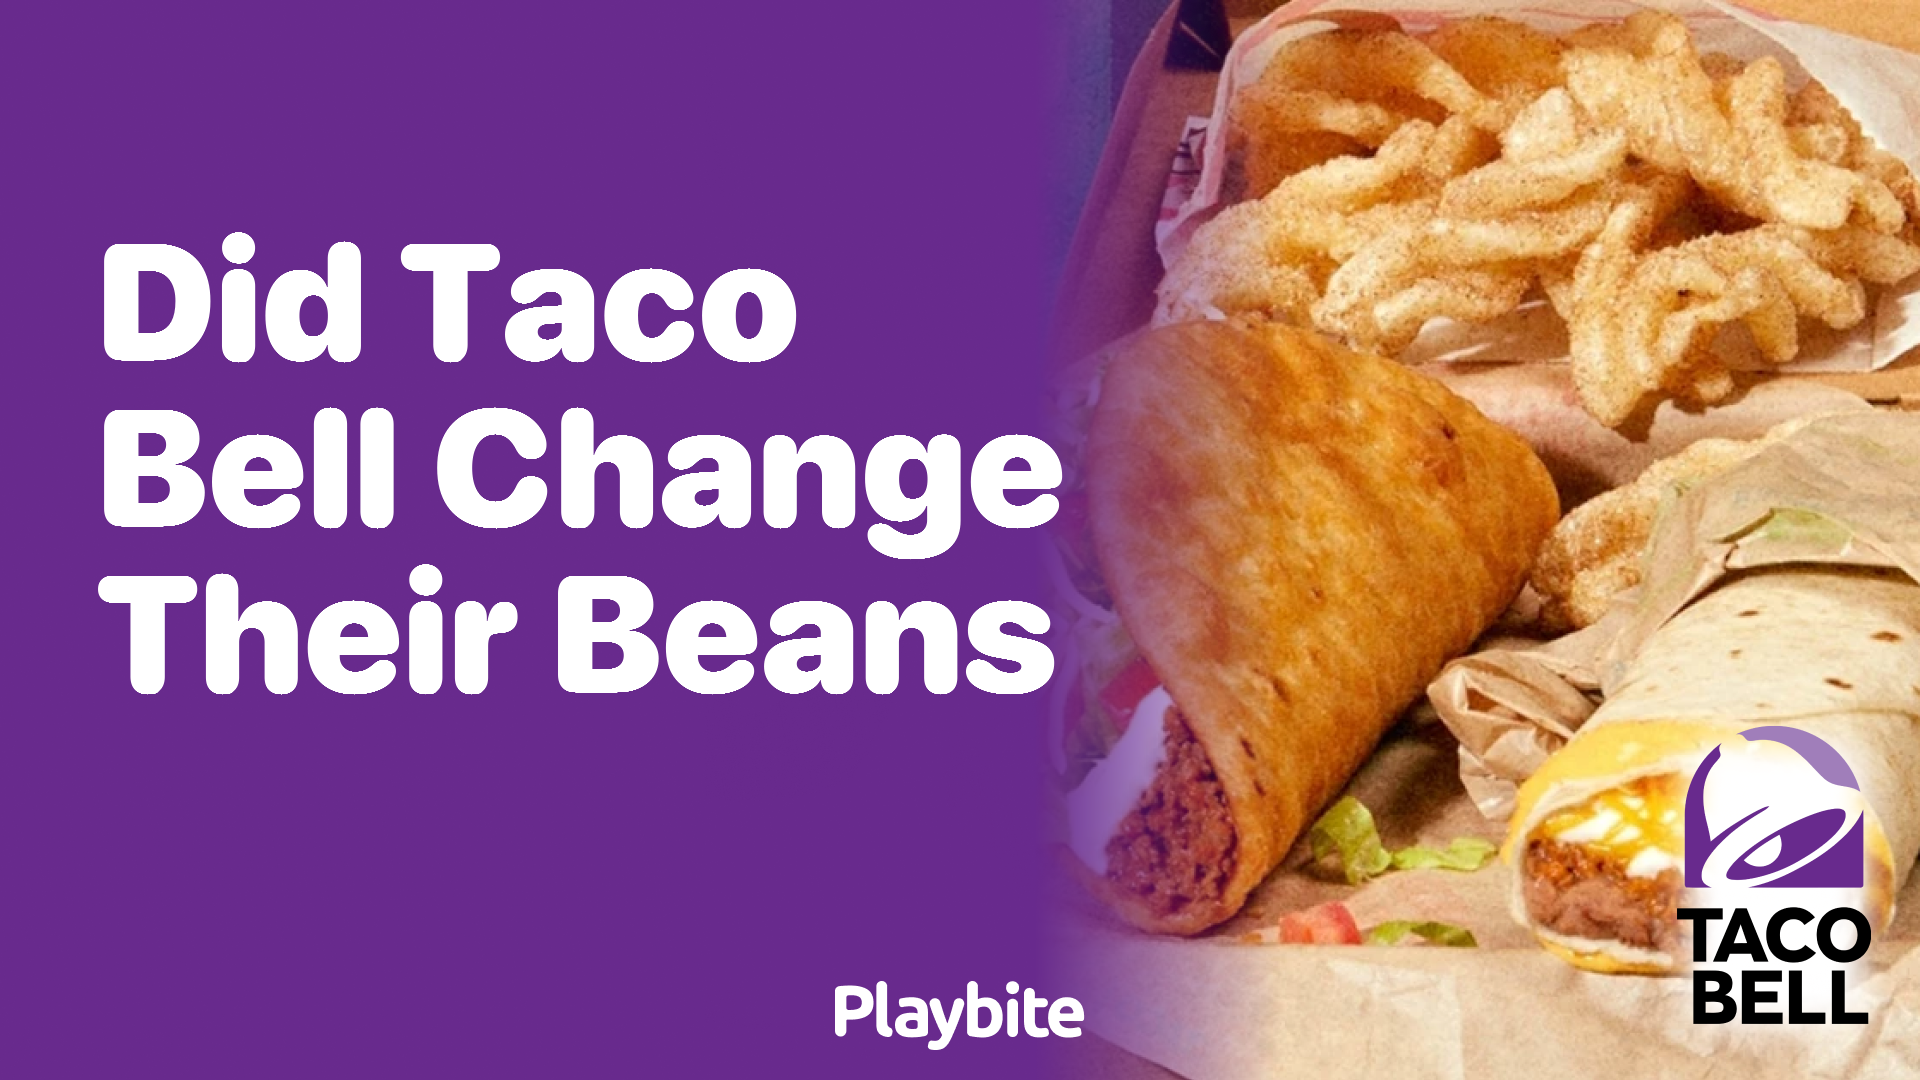 Did Taco Bell Change Their Beans?